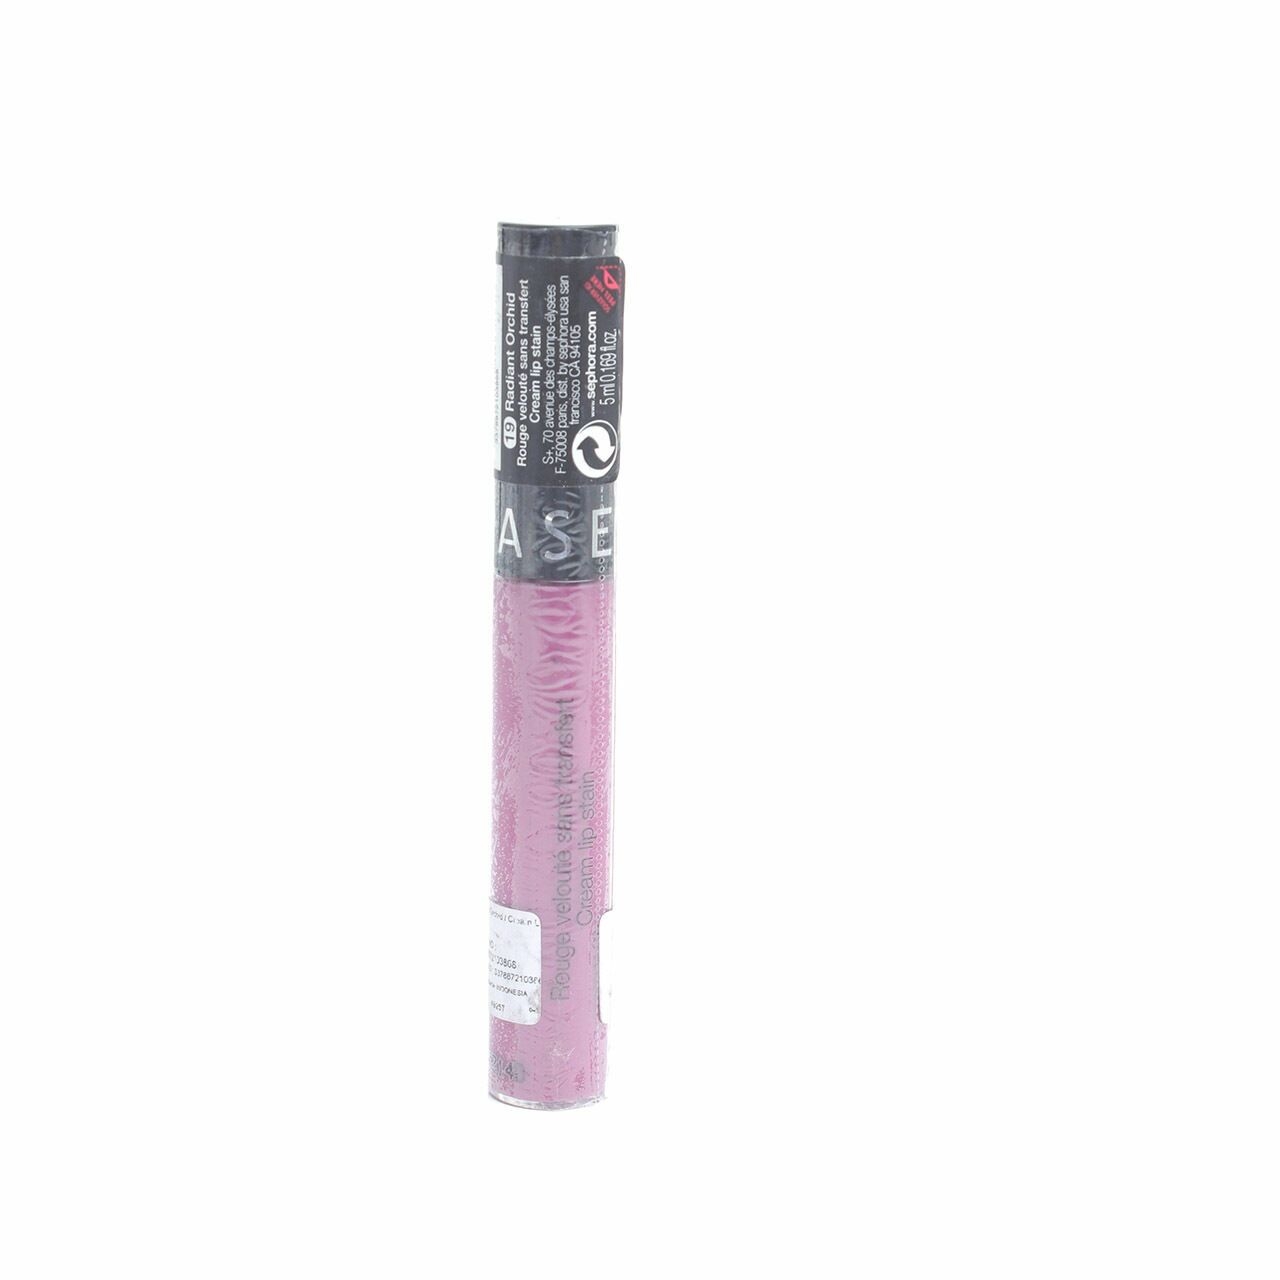 Sephora 19 Radiant Orchid Lip Stain